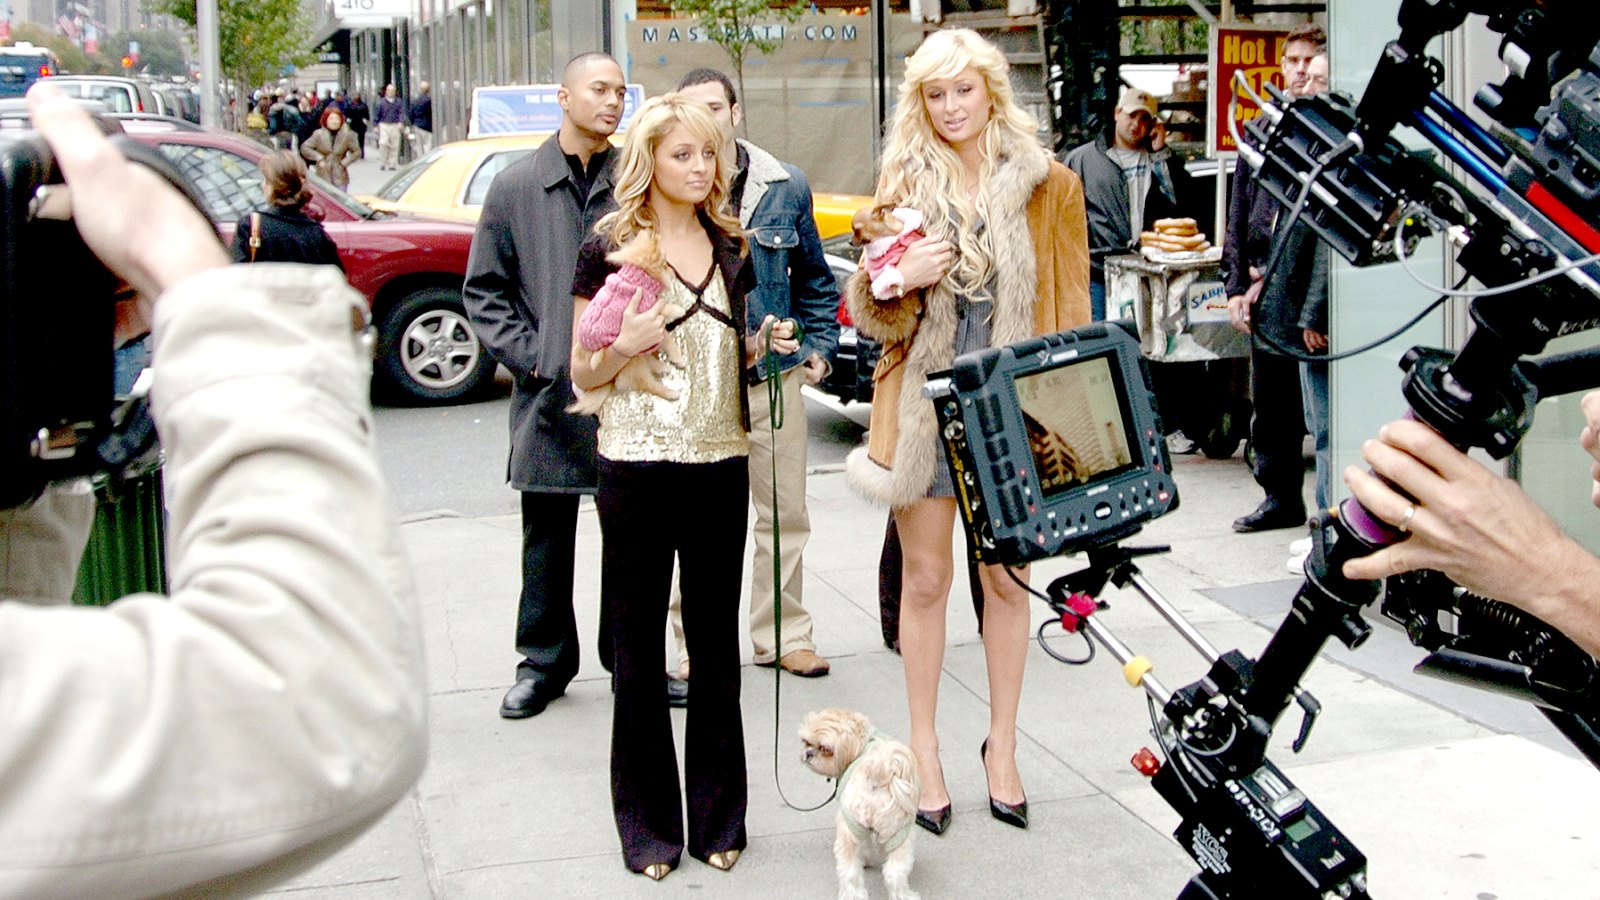 Nicole Richie (left), Paris Hilton and their pups are on camera at Park Ave. and 55th St. as they film a scene for their TV series "Simple Life."